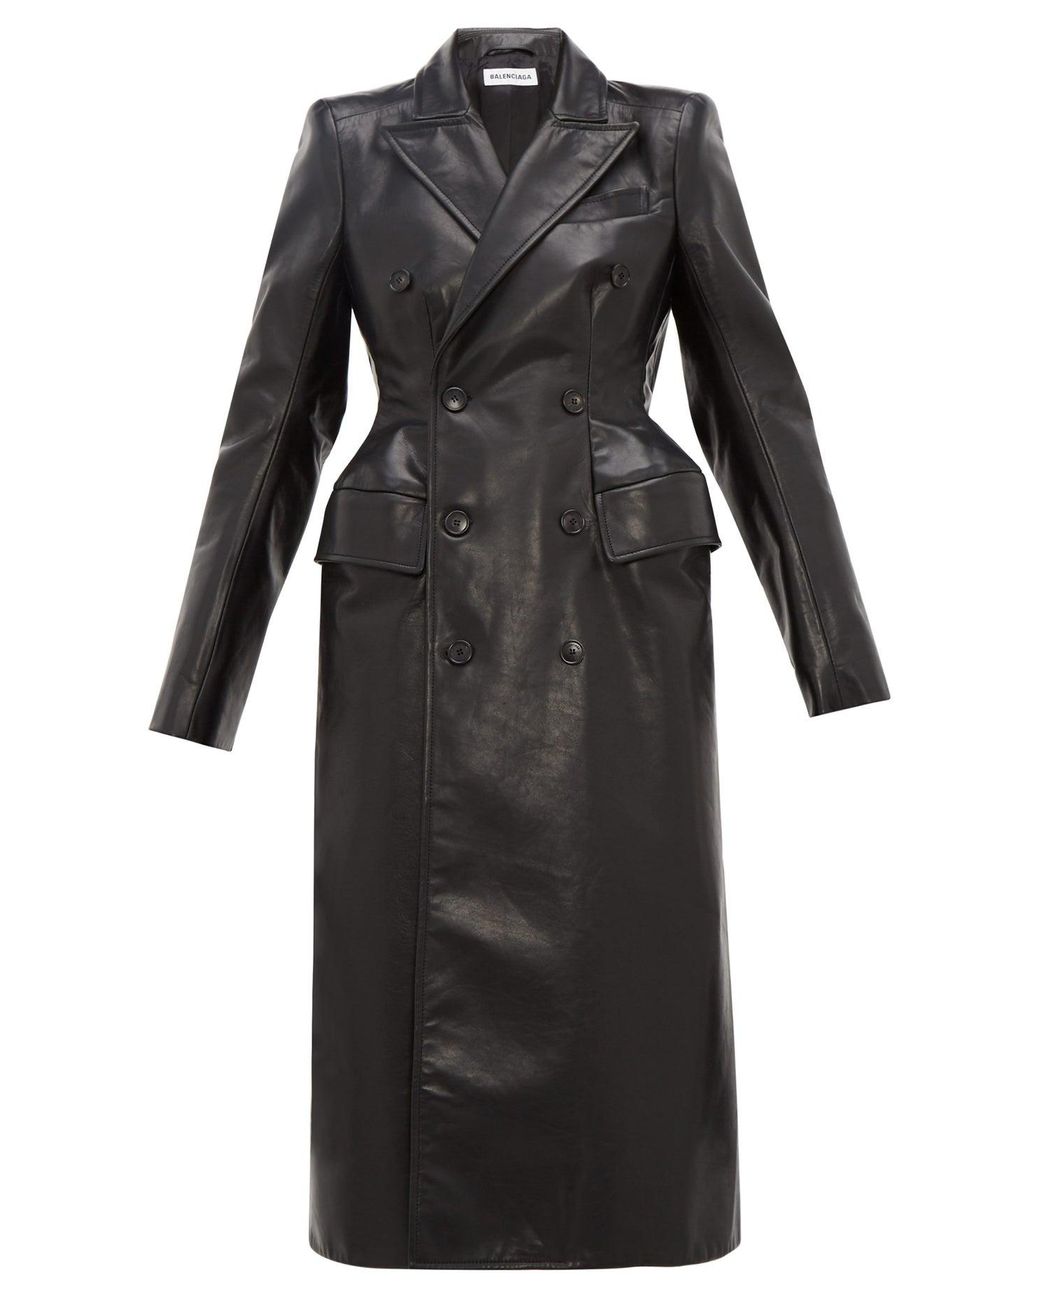 Balenciaga Double-breasted Hourglass Leather Coat in Black | Lyst Canada